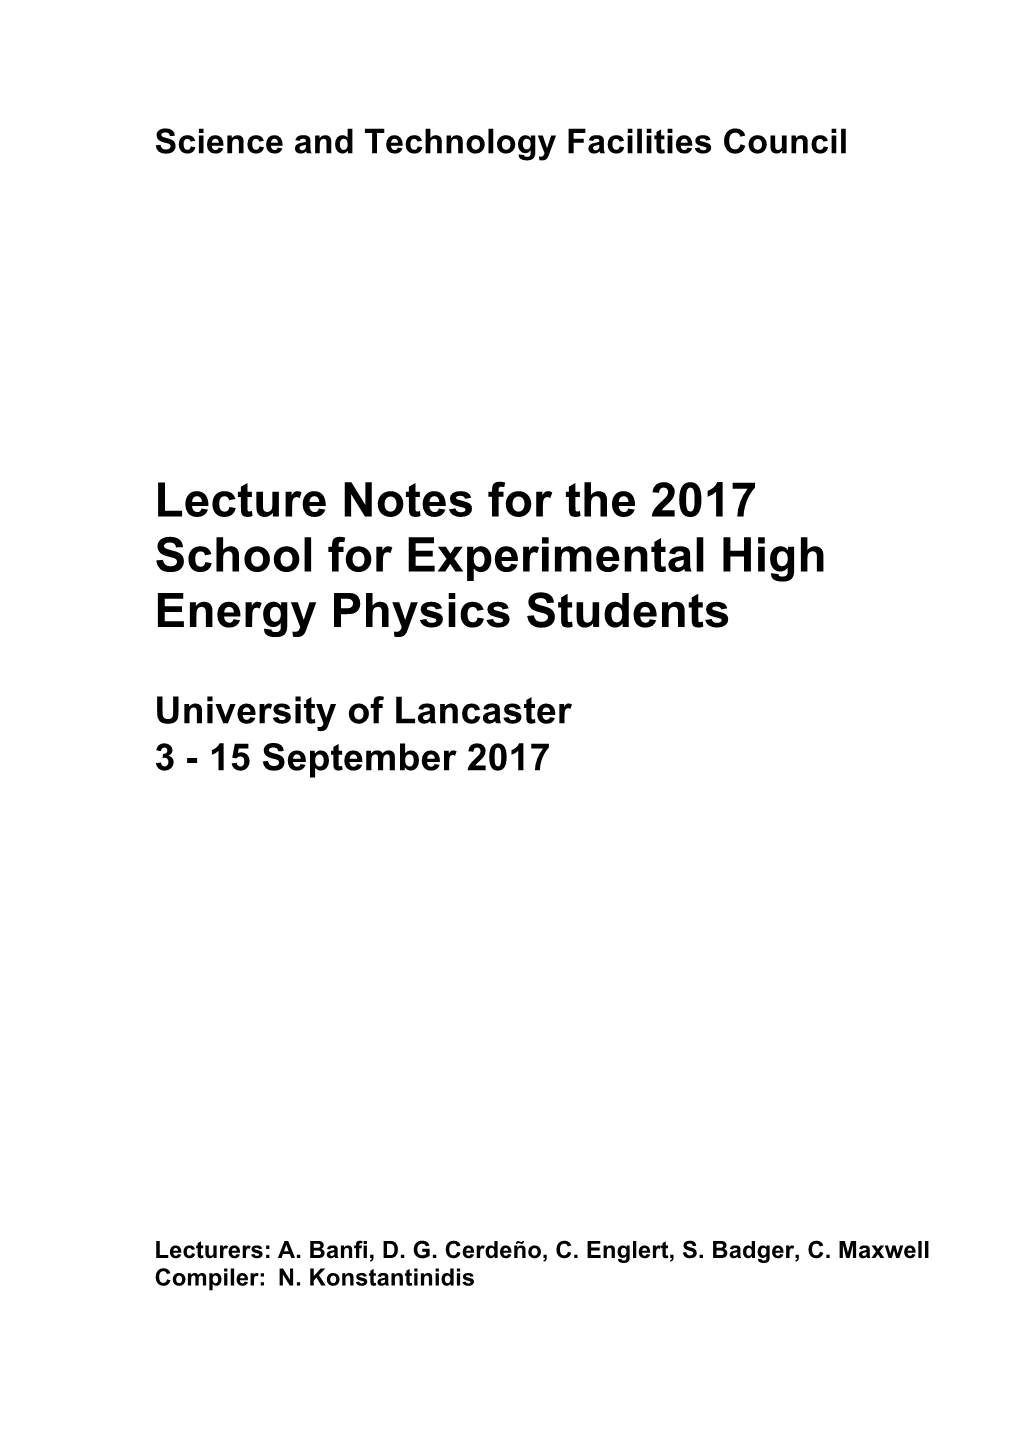 Lecture Notes for the 2017 School for Experimental High Energy Physics Students